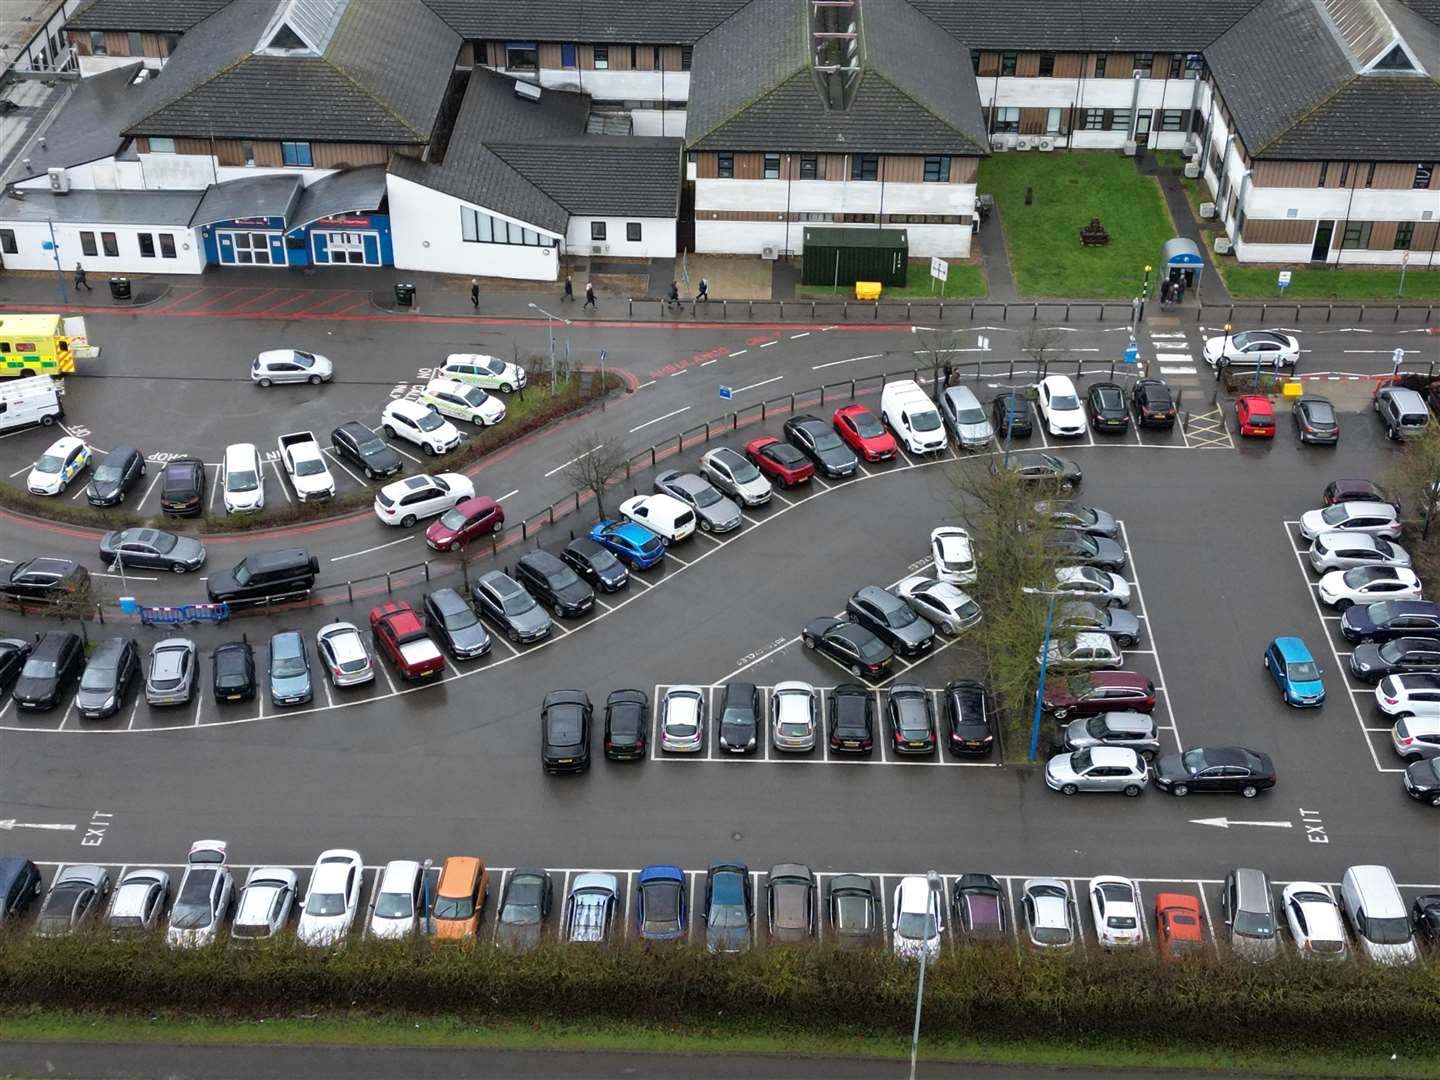 Mr Morris said he spent 45 minutes looking for a parking spot at Maidstone Hospital. Picture: Barry Goodwin